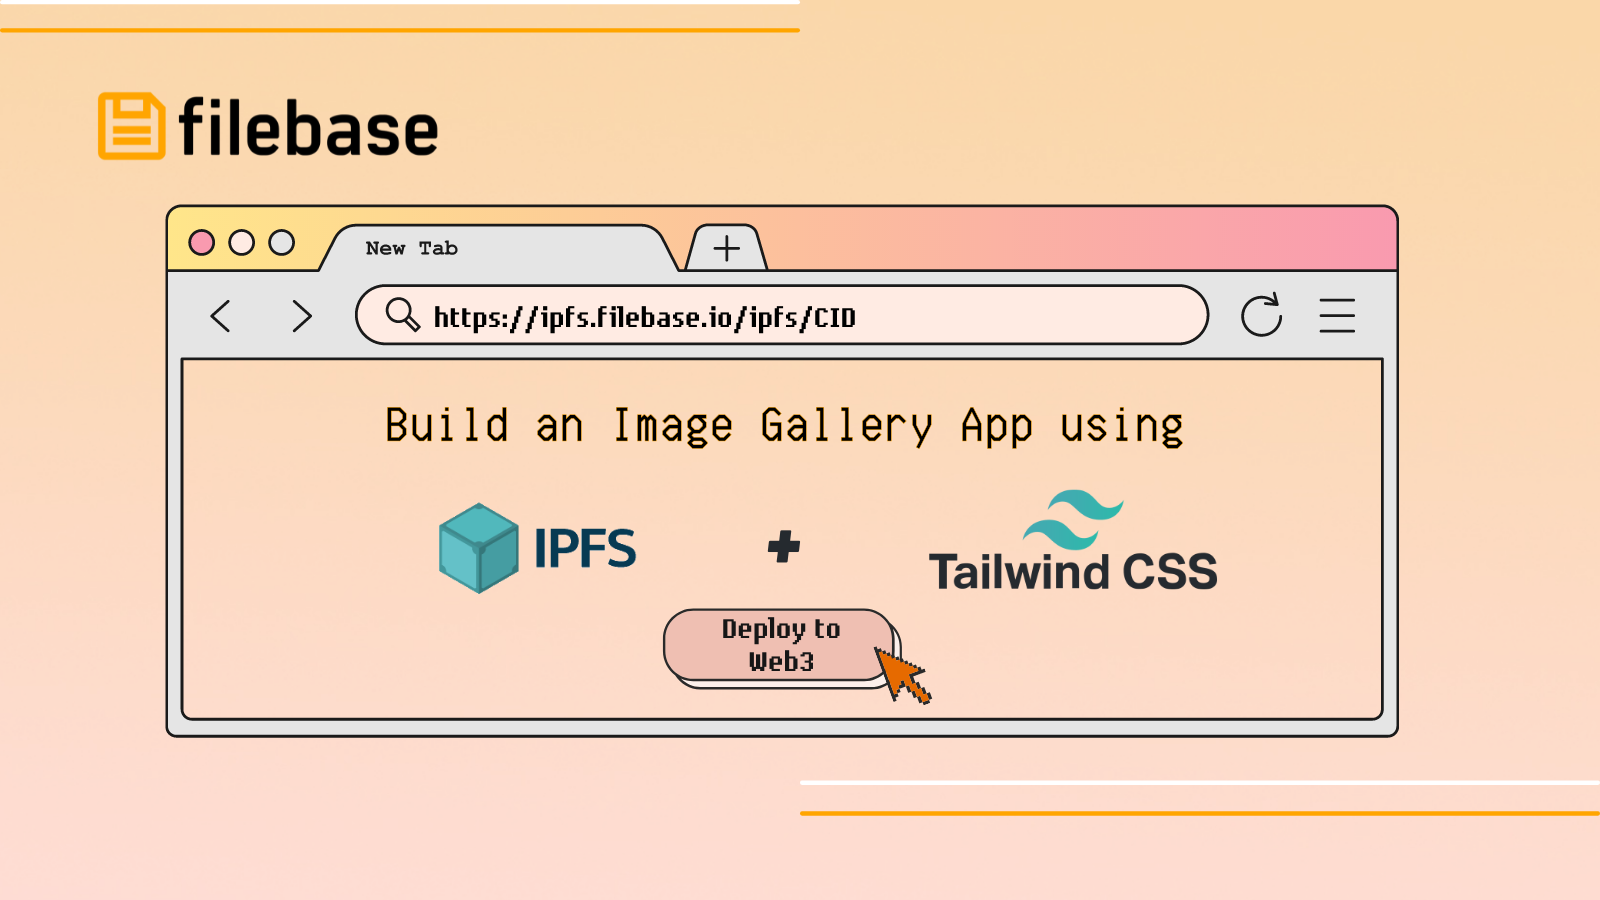 Build an Image Gallery App with IPFS and Tailwind CSS